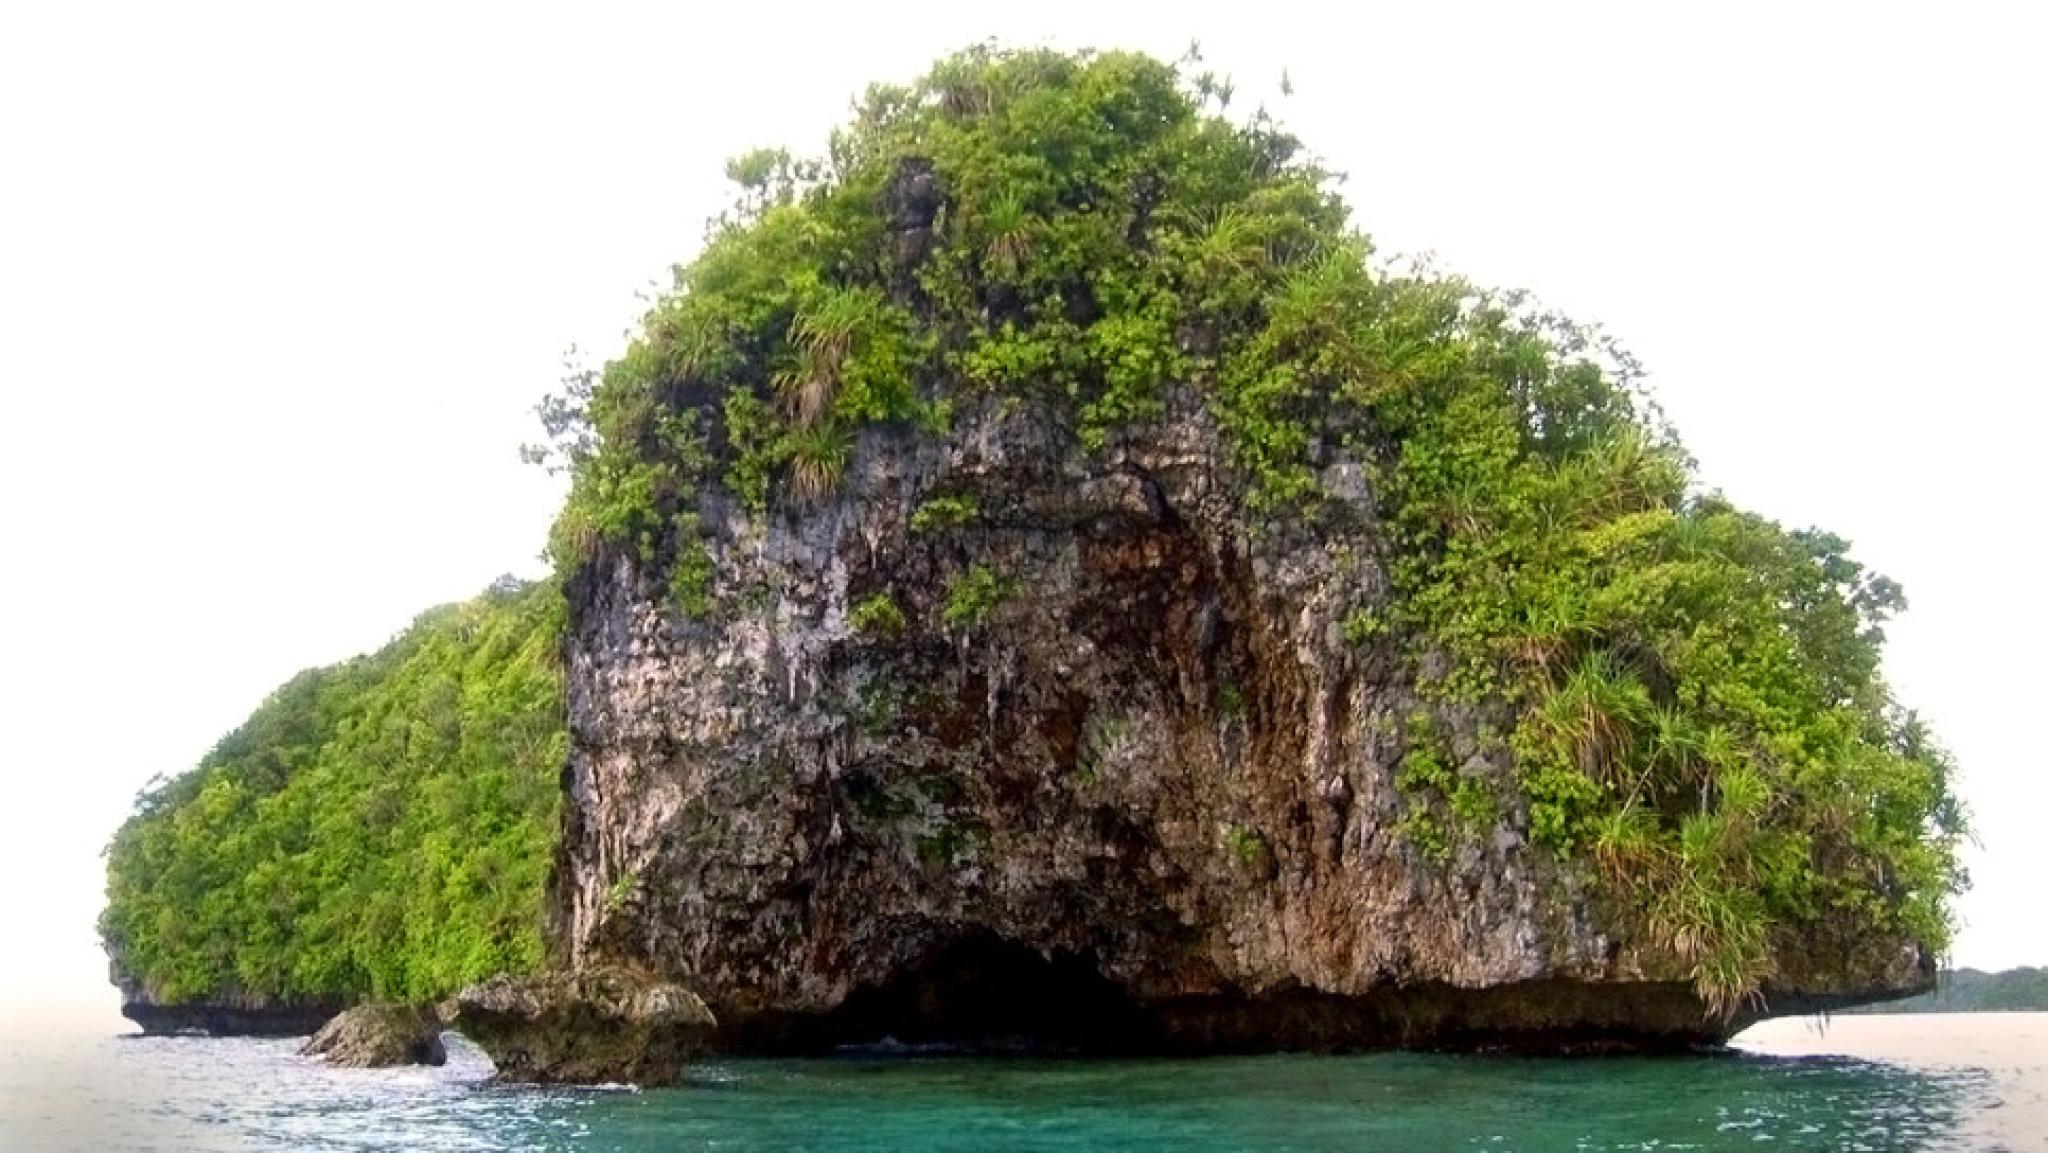 A shot facing an island from front on. The island looks like a large rock with greenery over it in the bright blue ocean.